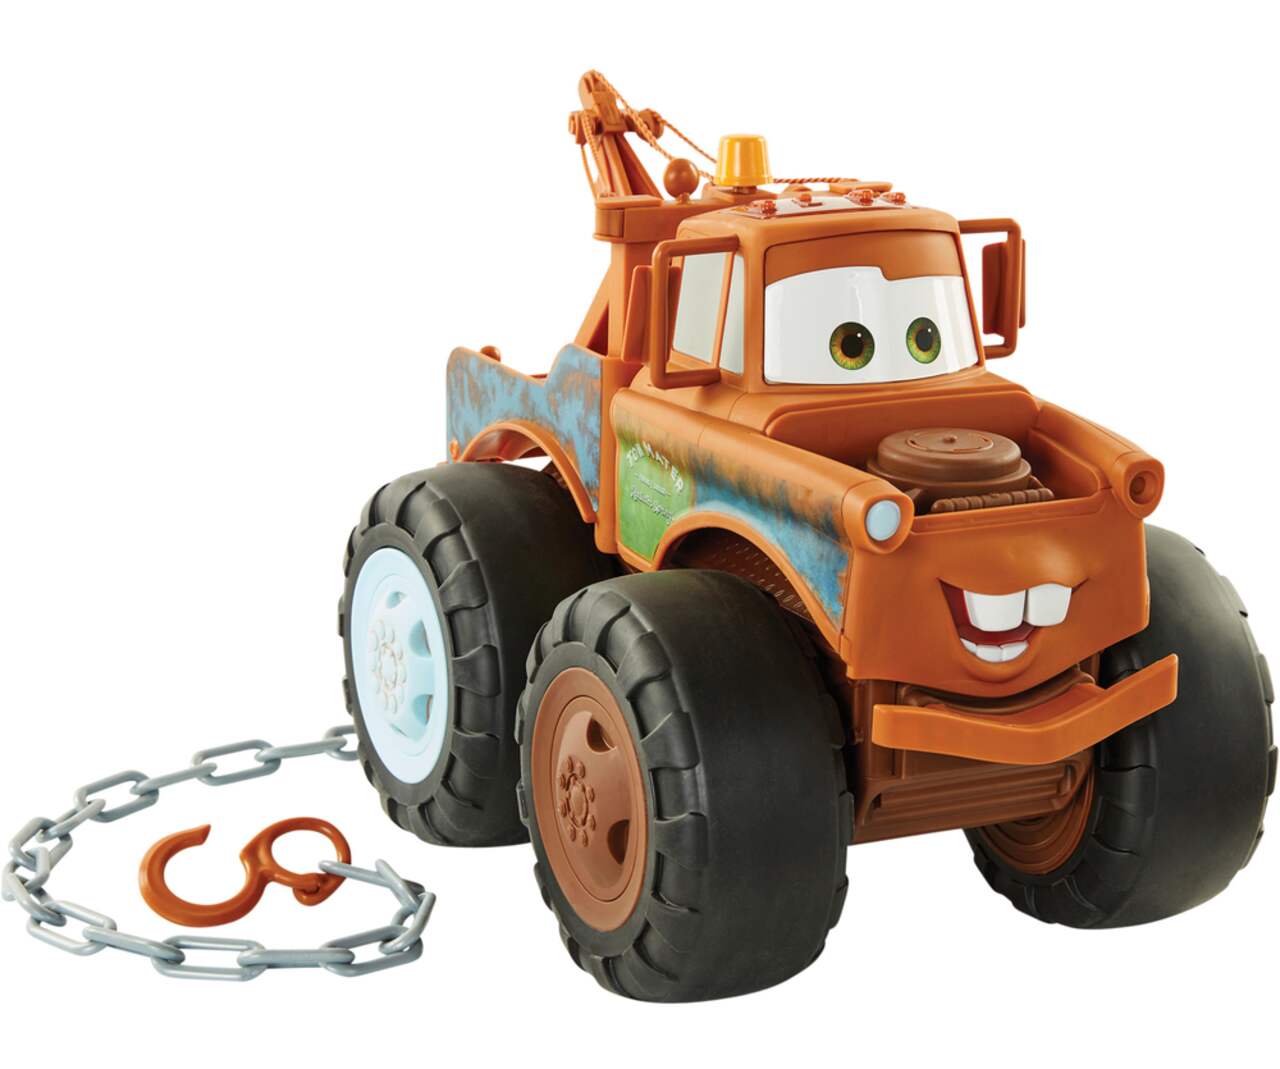 https://media-www.canadiantire.ca/product/seasonal-gardening/toys/toys-games/0503305/cars-3-max-tow-mater-616daa48-c905-42f9-adaa-845240c93f6d.png?imdensity=1&imwidth=640&impolicy=mZoom